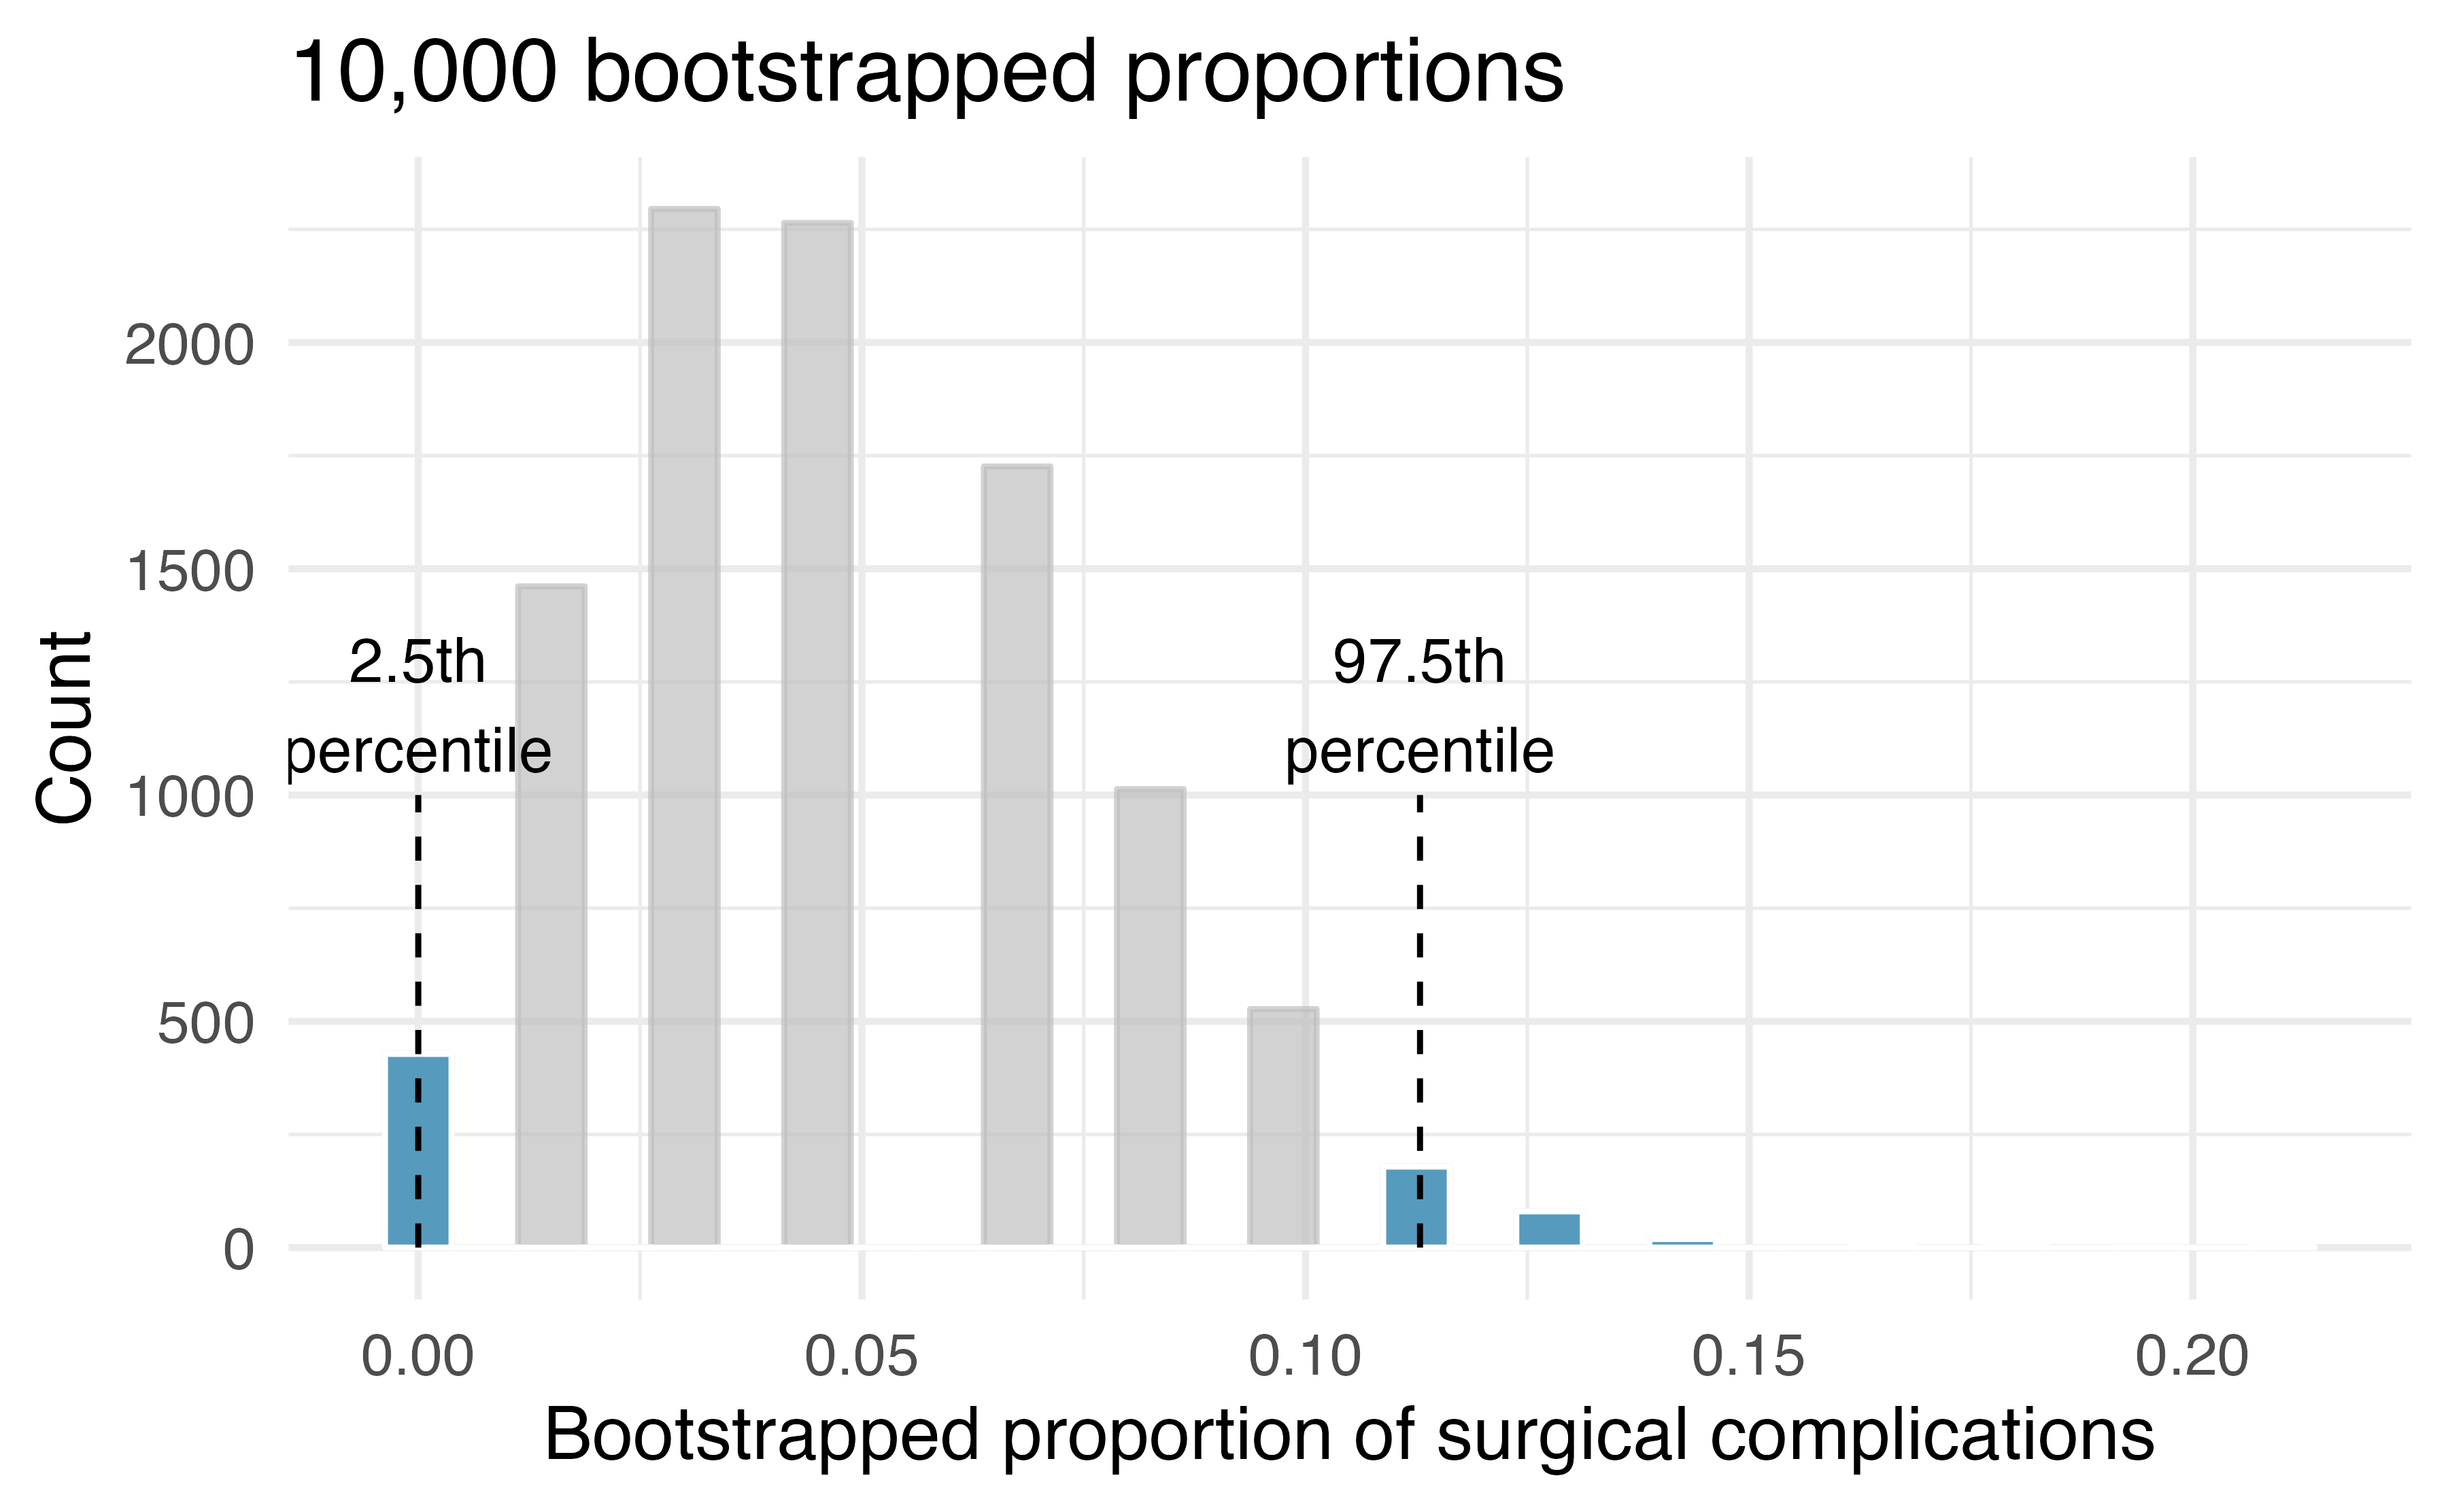 The original medical consultant data is bootstrapped 10,000 times. Each simulation creates a sample from the original data where the probability of a complication is \(\hat{p} = 3/62.\) The bootstrap 2.5 percentile proportion is 0 and the 97.5 percentile is 0.113. The result is: we are 95% confident that, in the population, the true probability of a complication is between 0% and 11.3%.